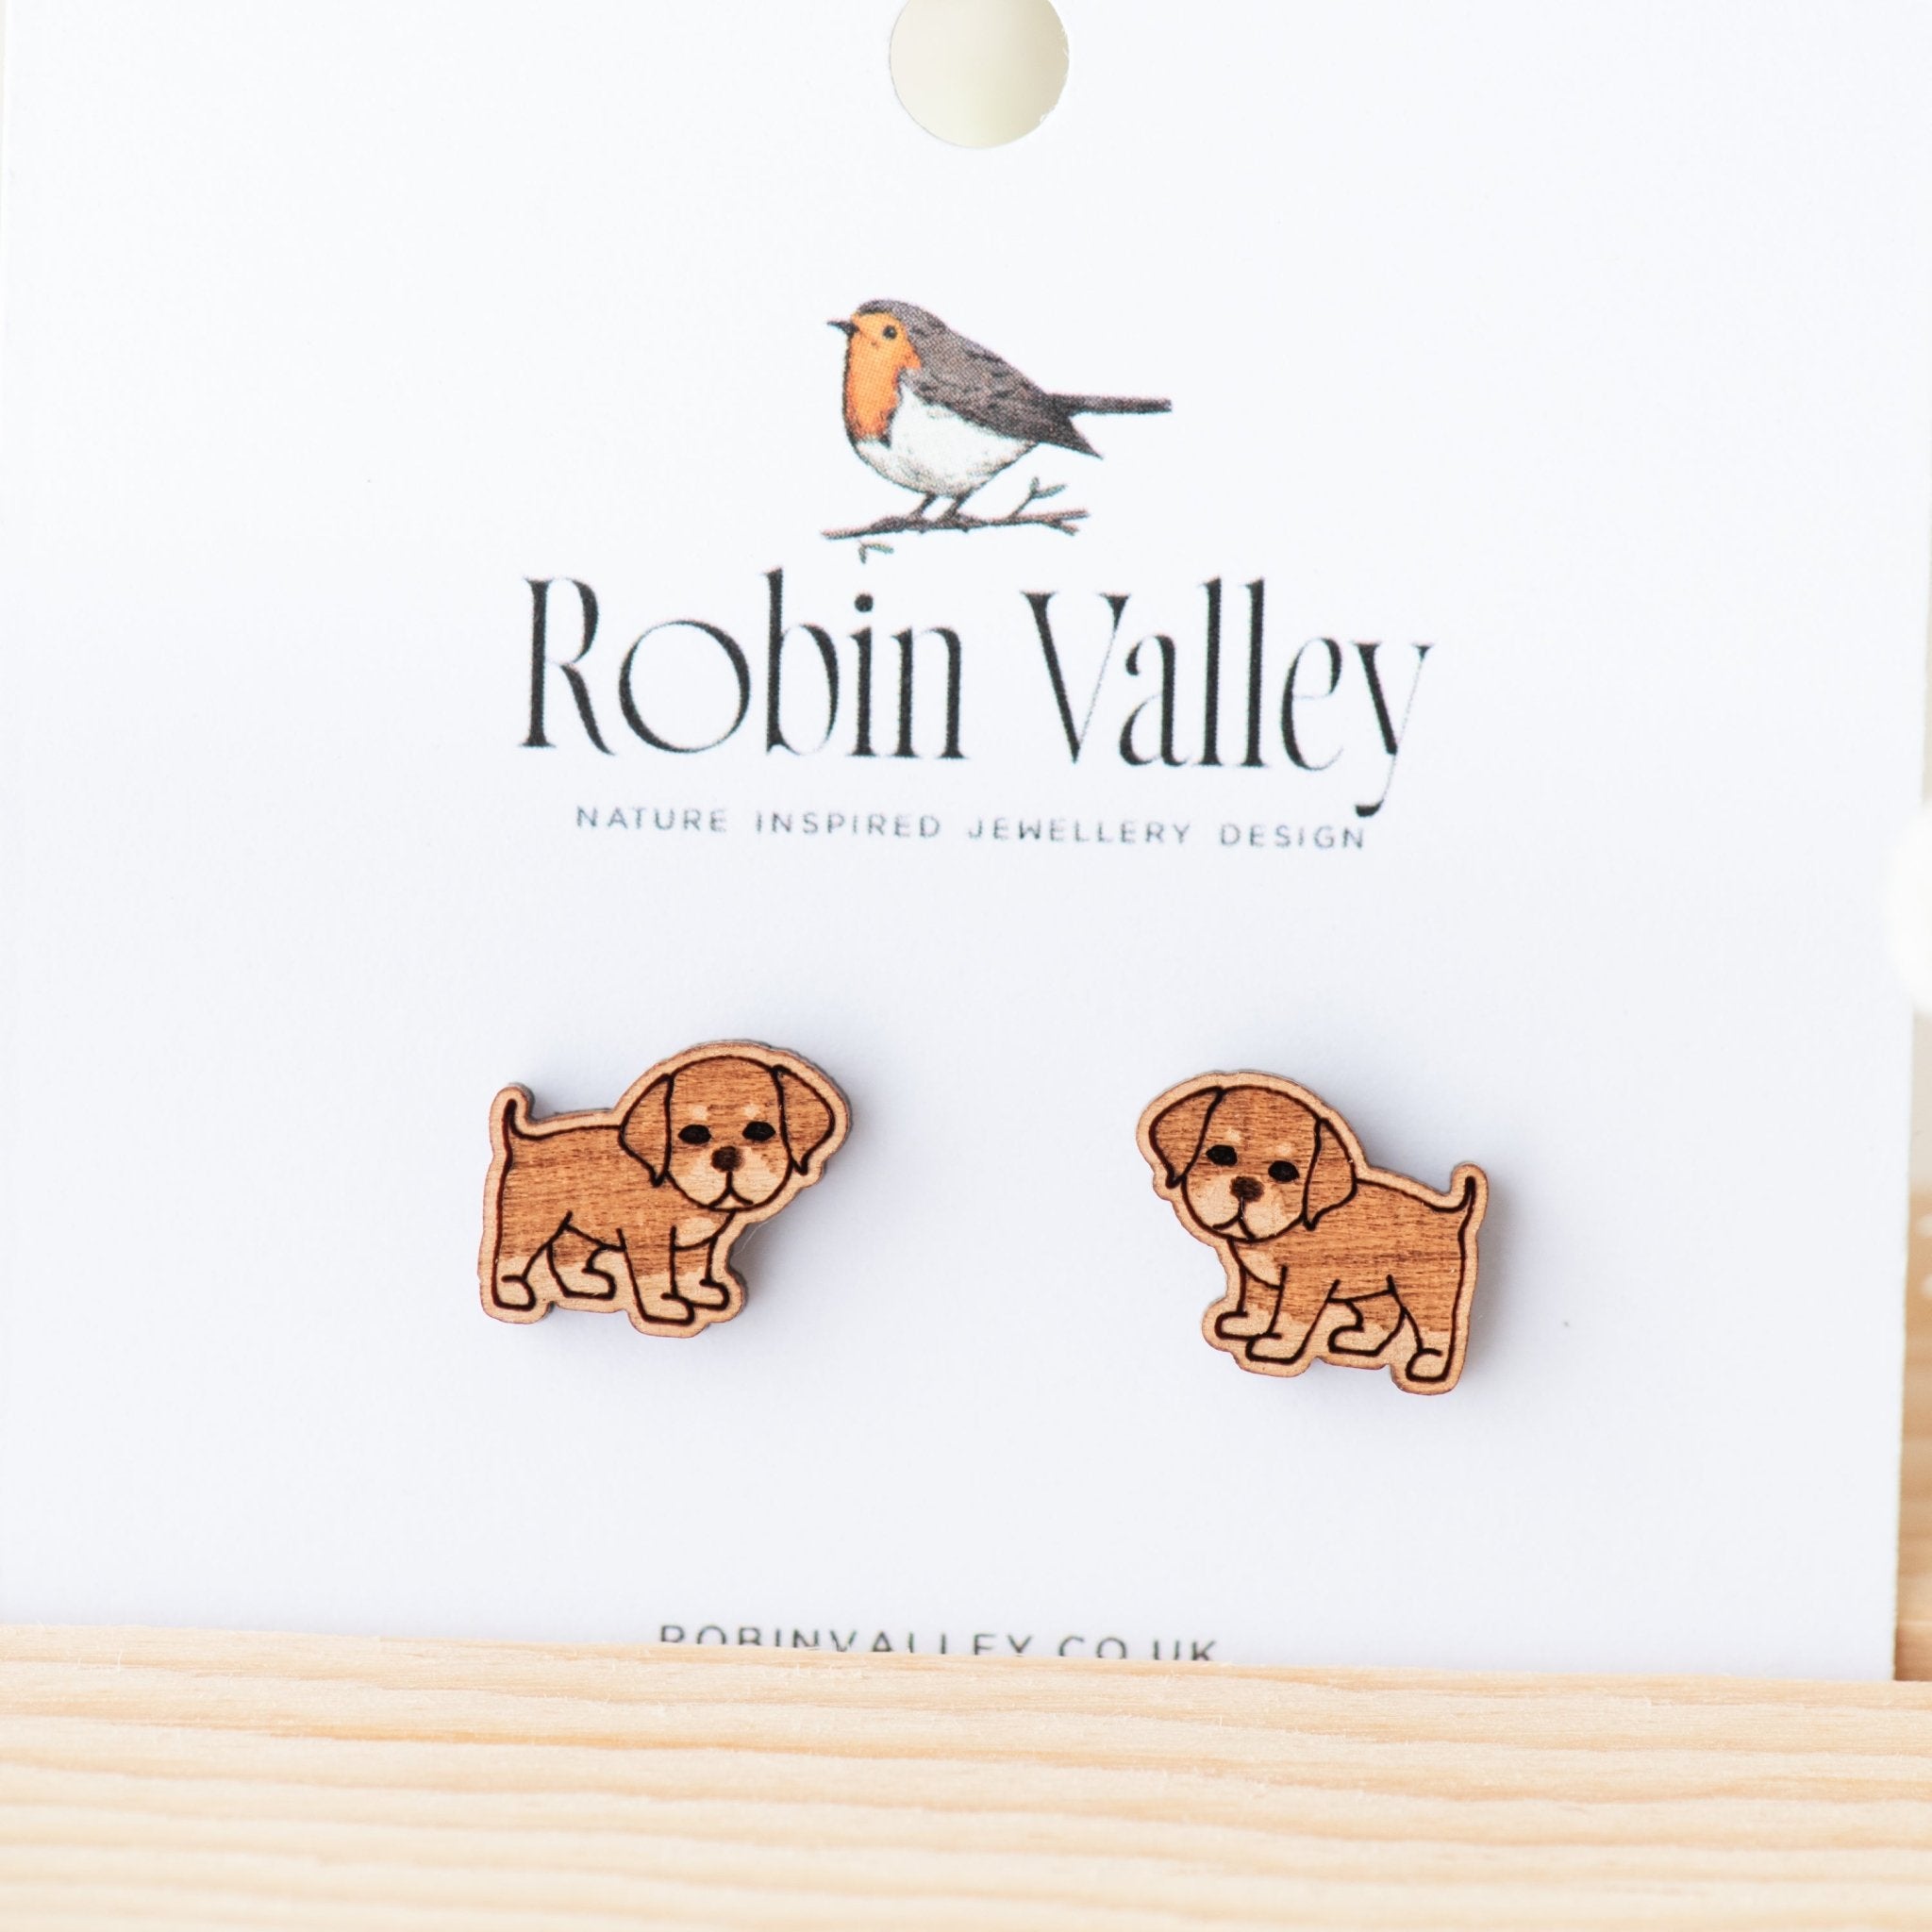 Rottweiler Dog Cherry Wood Stud Earrings - EL10227 - Robin Valley Official Store